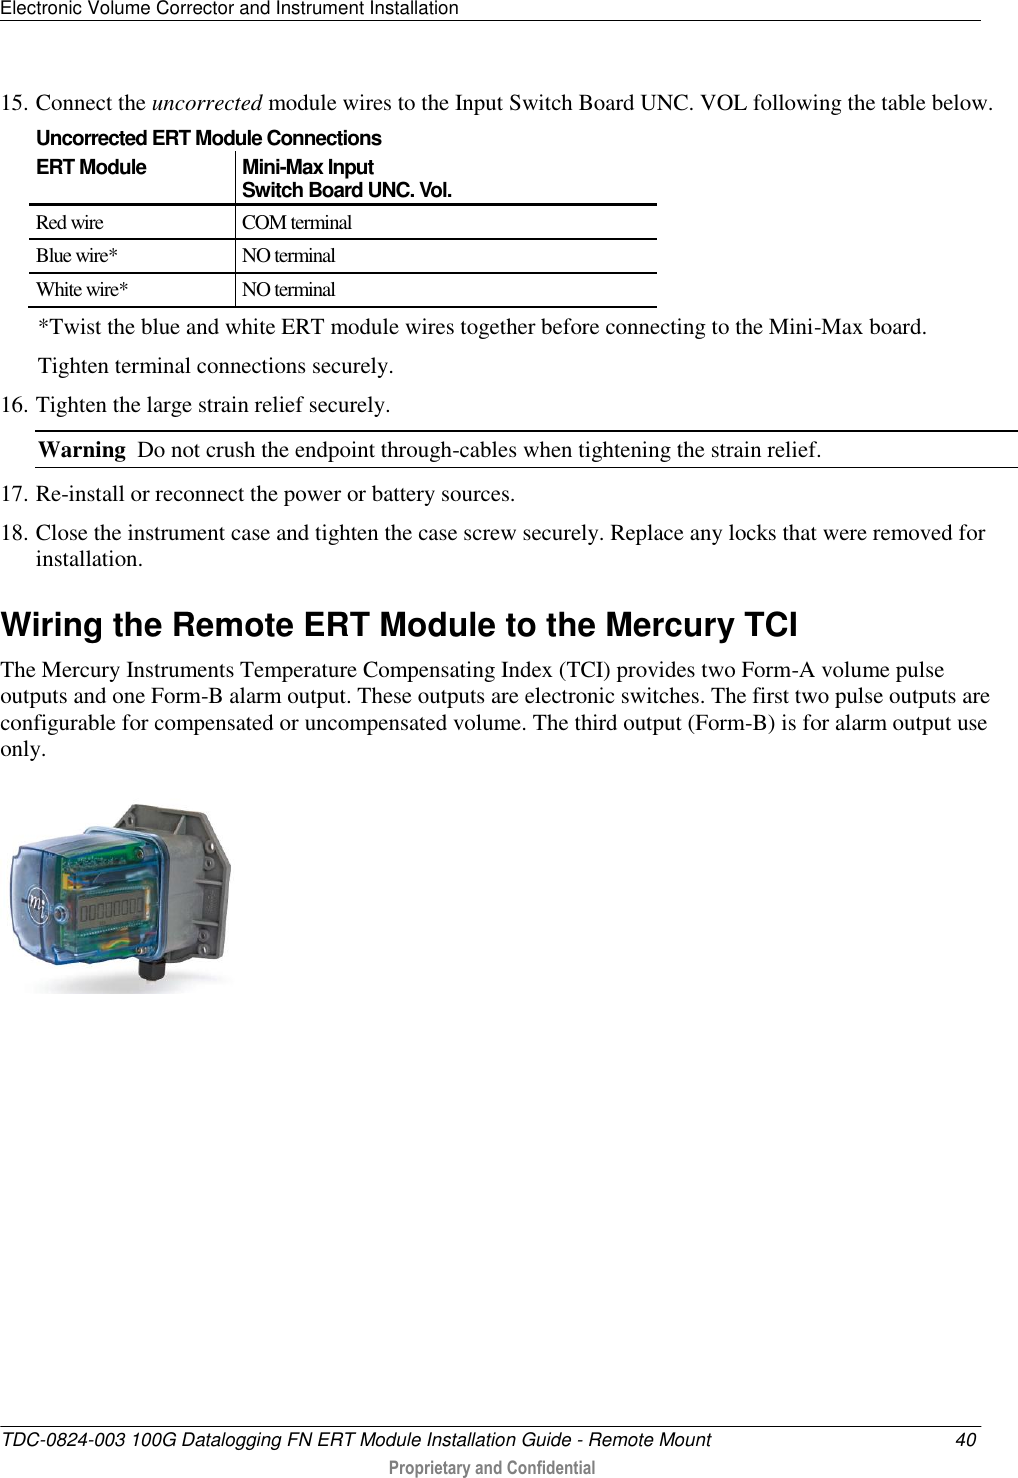 Electronic Volume Corrector and Instrument Installation   TDC-0824-003 100G Datalogging FN ERT Module Installation Guide - Remote Mount  40  Proprietary and Confidential    15. Connect the uncorrected module wires to the Input Switch Board UNC. VOL following the table below.  Uncorrected ERT Module Connections ERT Module Mini-Max Input  Switch Board UNC. Vol. Red wire  COM terminal Blue wire* NO terminal White wire* NO terminal *Twist the blue and white ERT module wires together before connecting to the Mini-Max board.  Tighten terminal connections securely. 16. Tighten the large strain relief securely.  Warning  Do not crush the endpoint through-cables when tightening the strain relief. 17. Re-install or reconnect the power or battery sources. 18. Close the instrument case and tighten the case screw securely. Replace any locks that were removed for installation.  Wiring the Remote ERT Module to the Mercury TCI The Mercury Instruments Temperature Compensating Index (TCI) provides two Form-A volume pulse outputs and one Form-B alarm output. These outputs are electronic switches. The first two pulse outputs are configurable for compensated or uncompensated volume. The third output (Form-B) is for alarm output use only.  